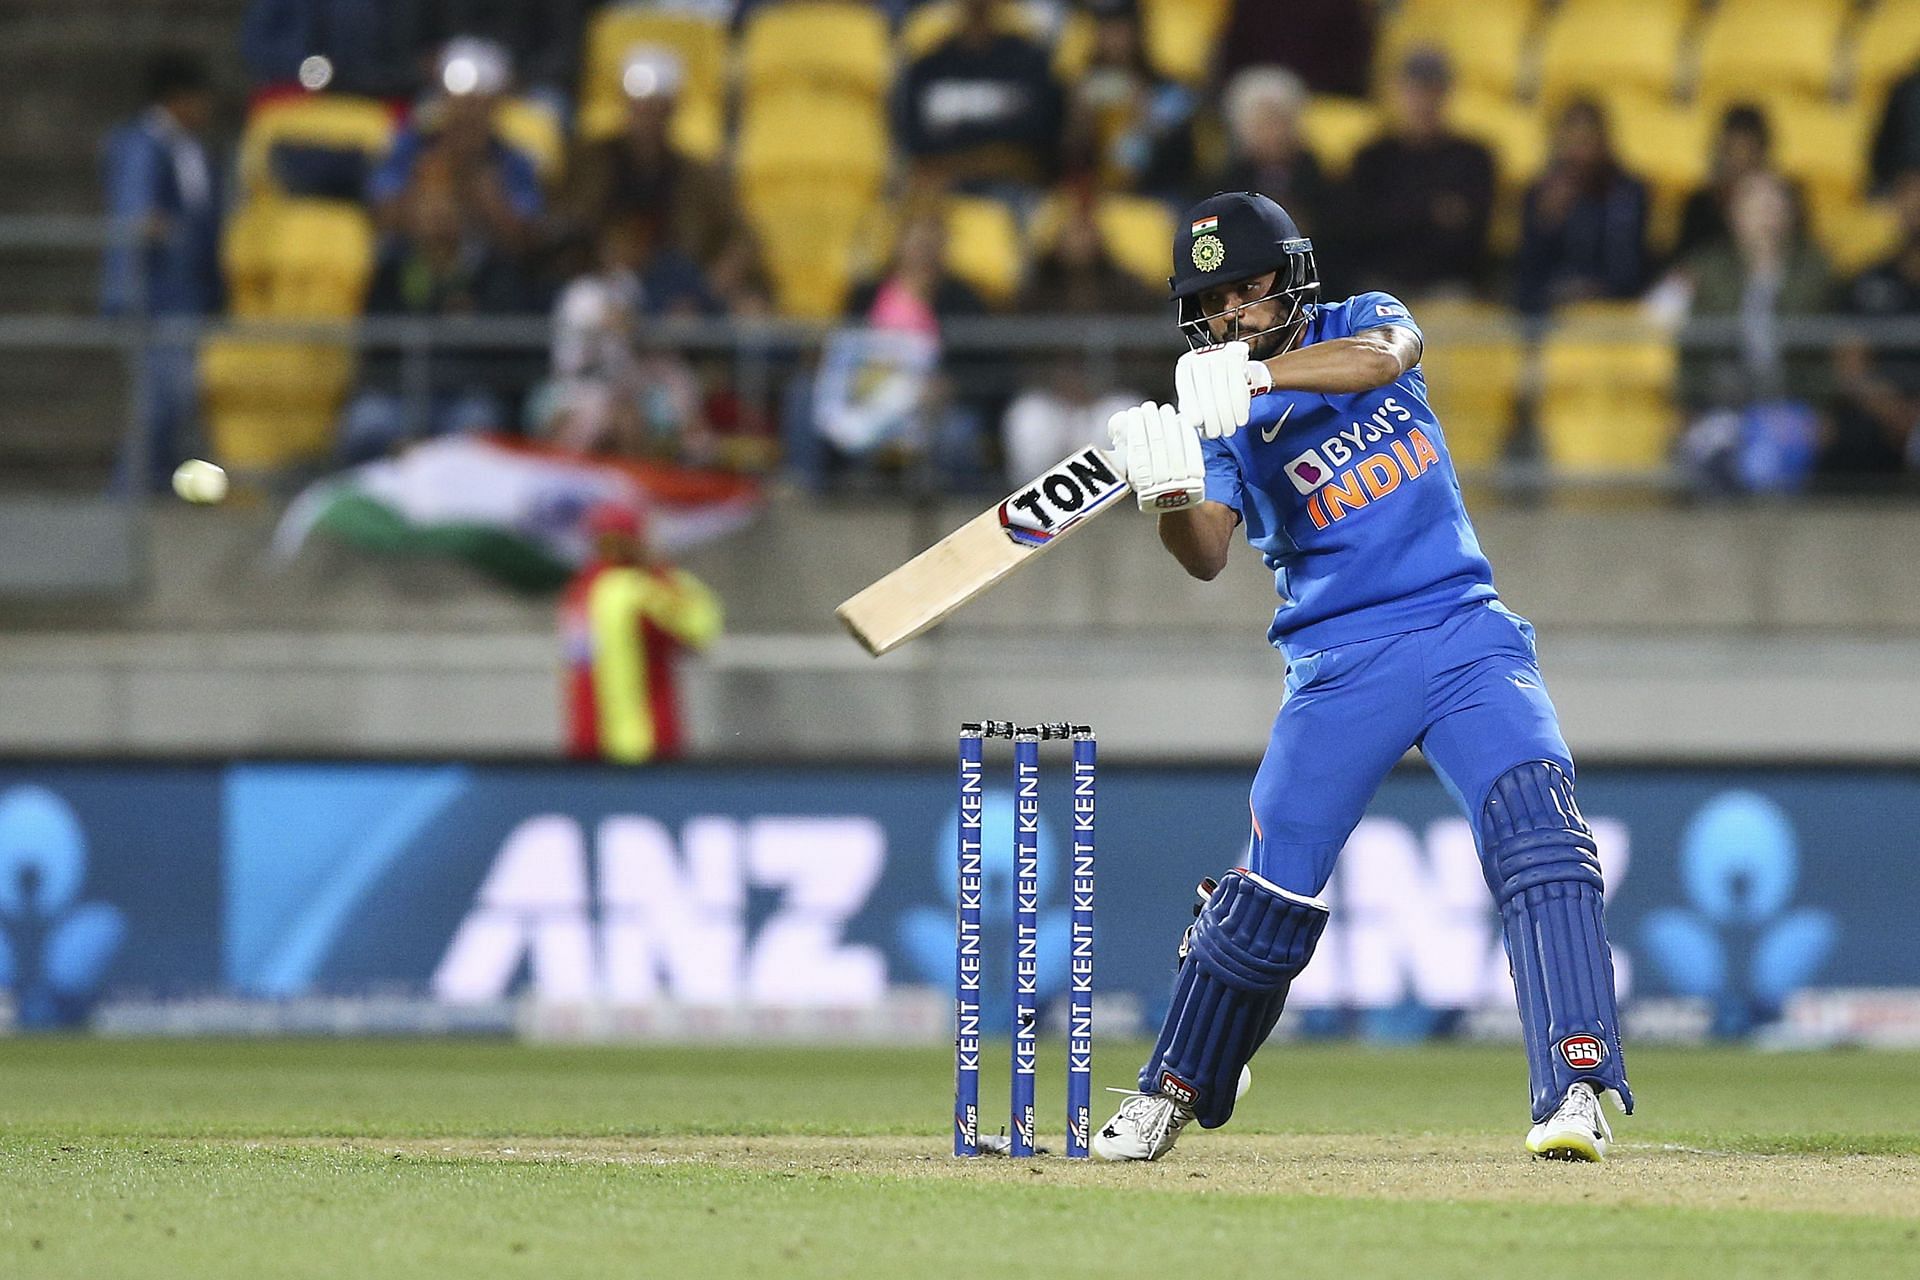 Manish Pandey has scored one century and five half-centuries for India (Image: Getty)